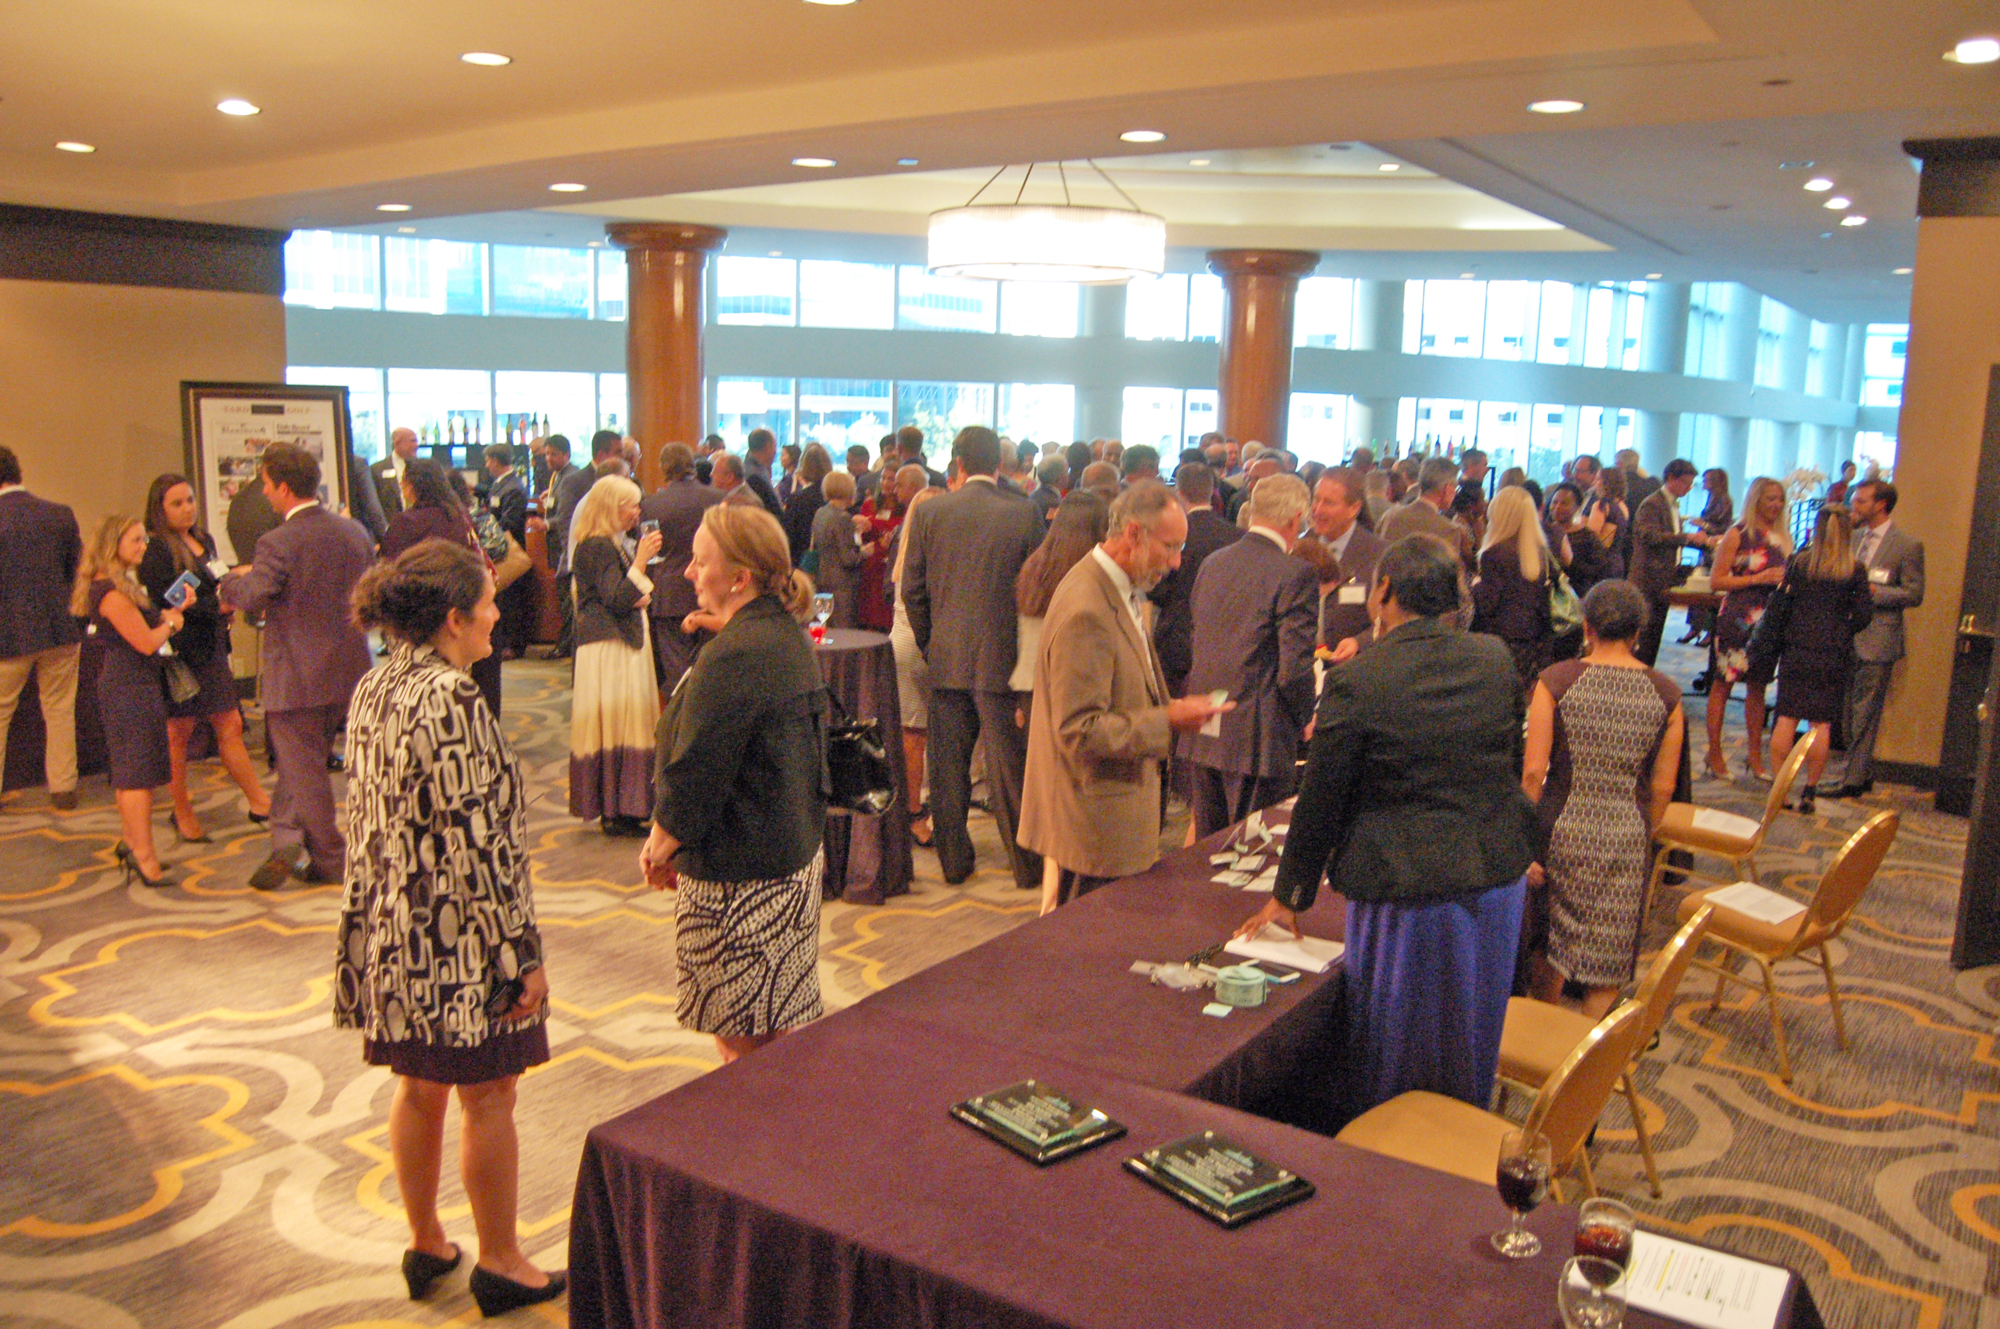 About 300 people attended the 16th annual Robert J. Beckham Equal Justice Awards on Sept. 19.